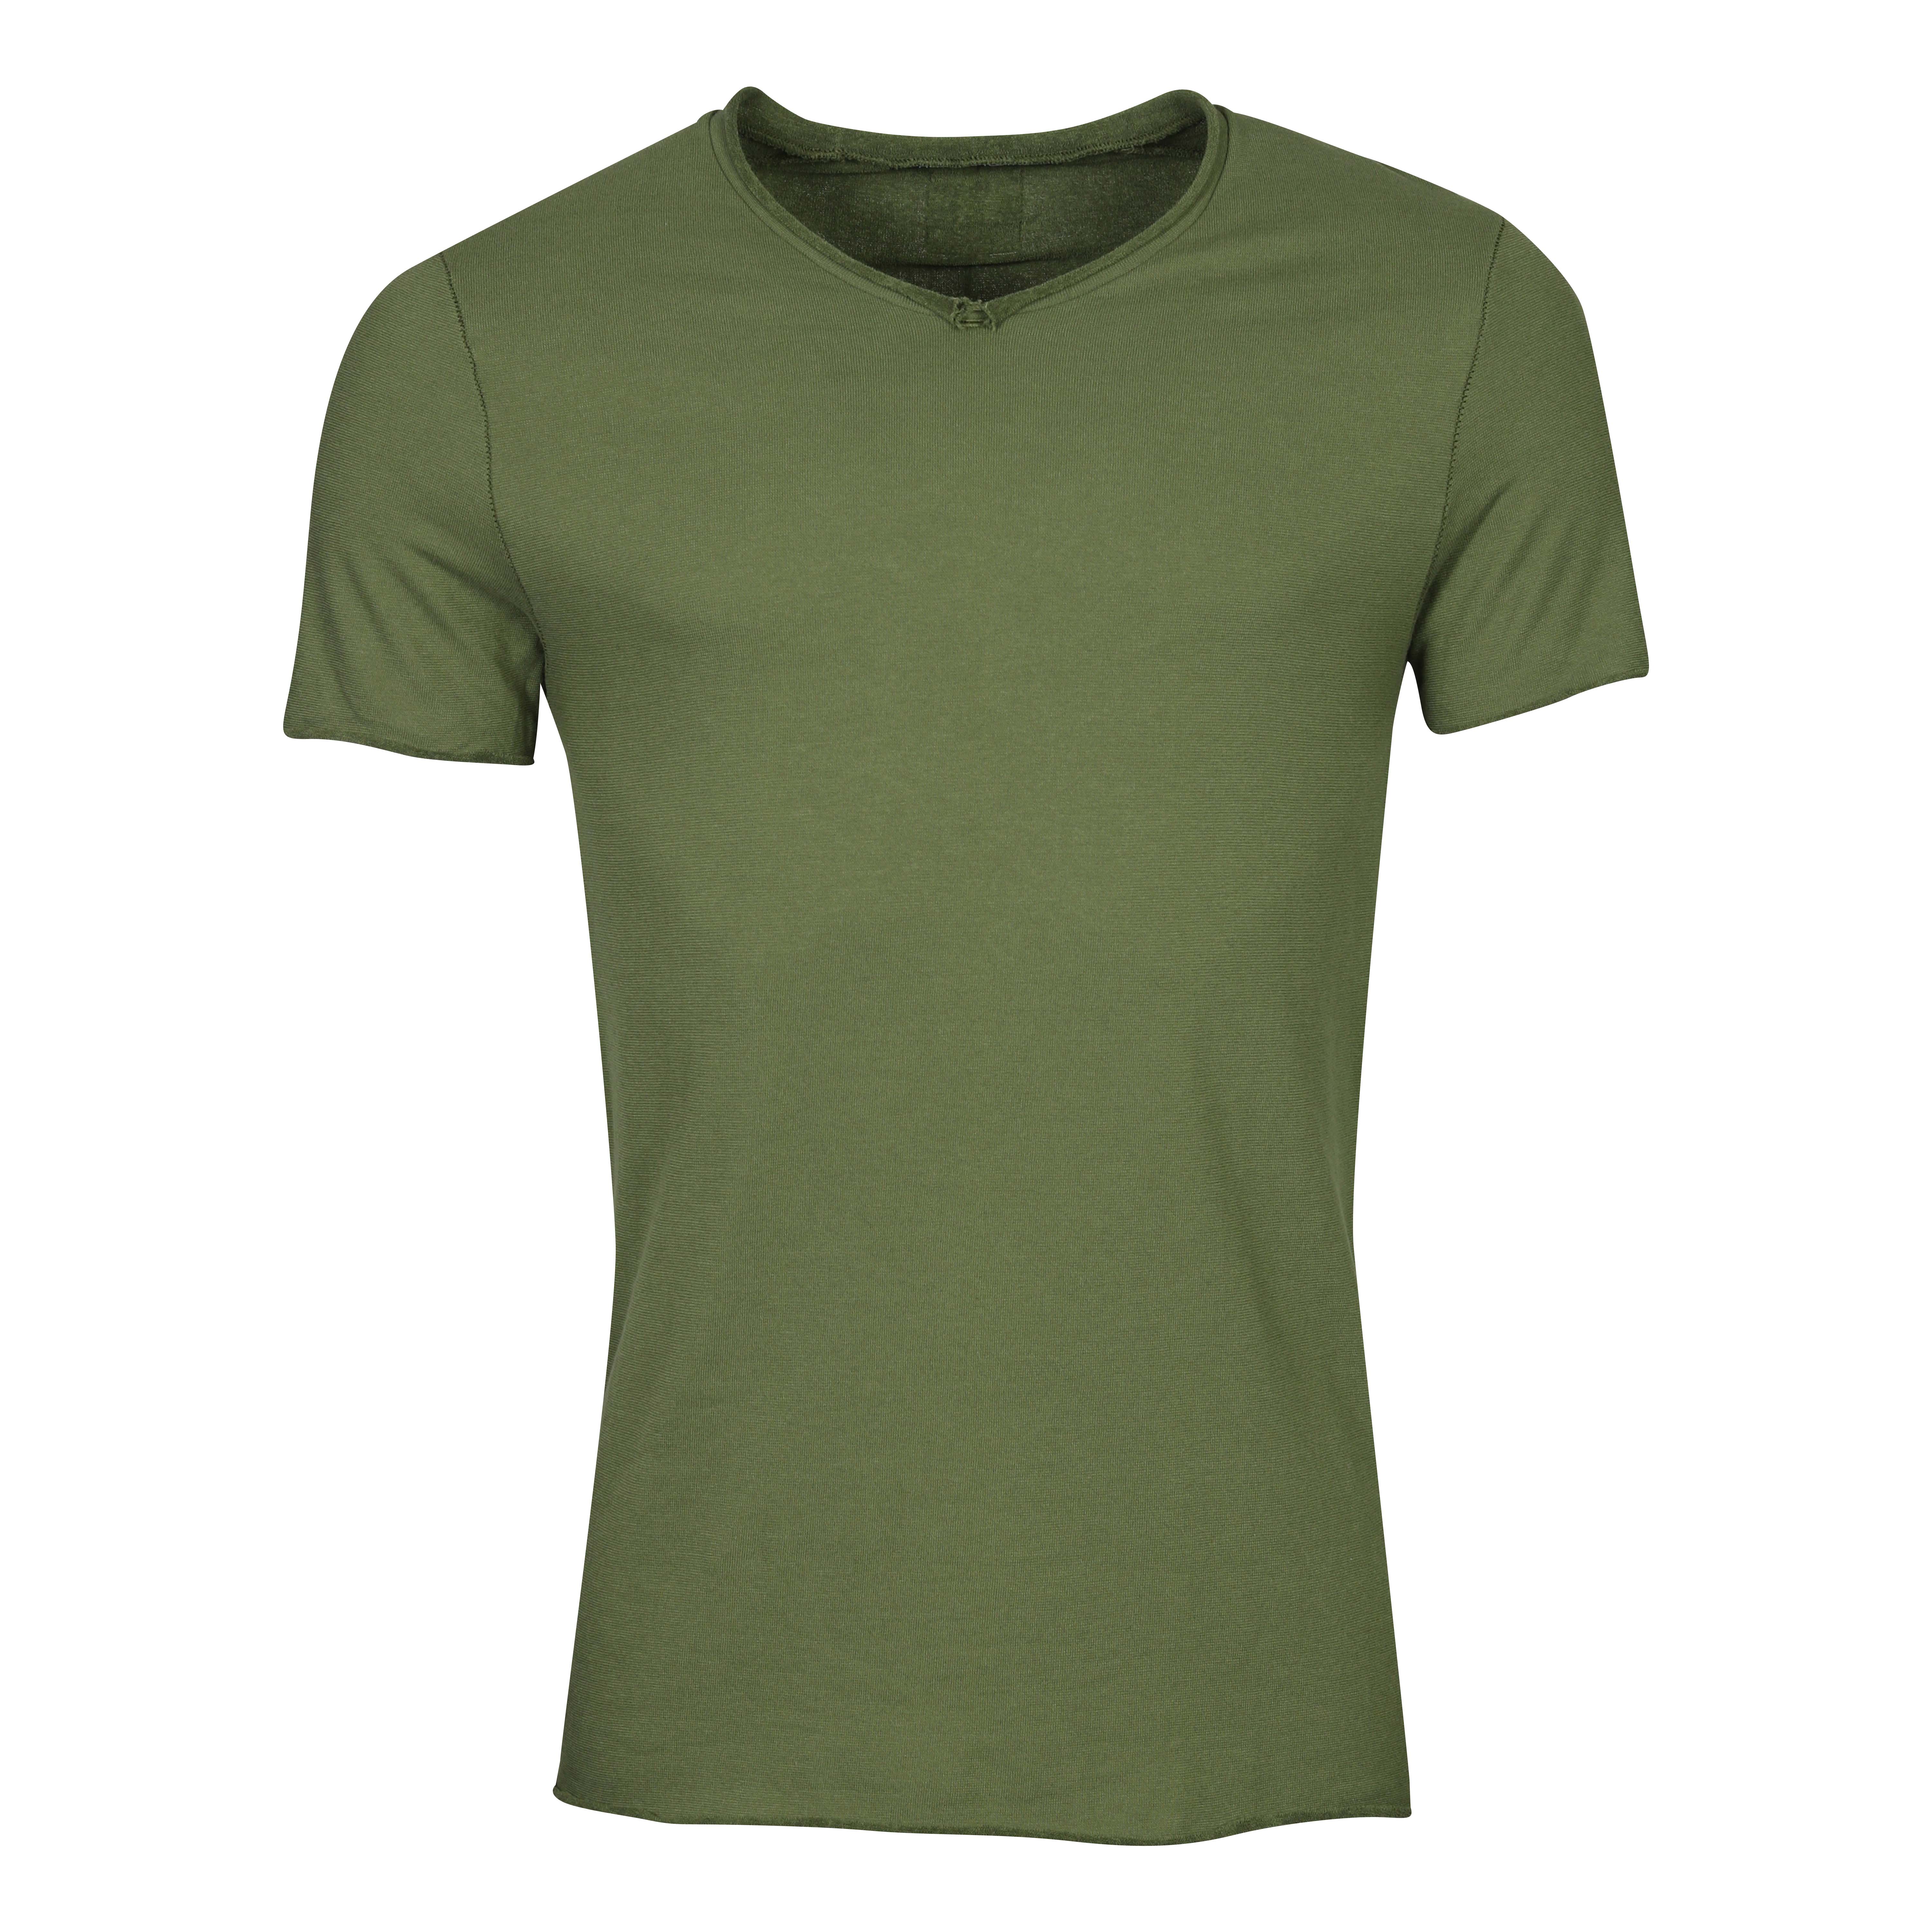 Hannes Roether Frottee V-Neck T-Shirt in Pesto